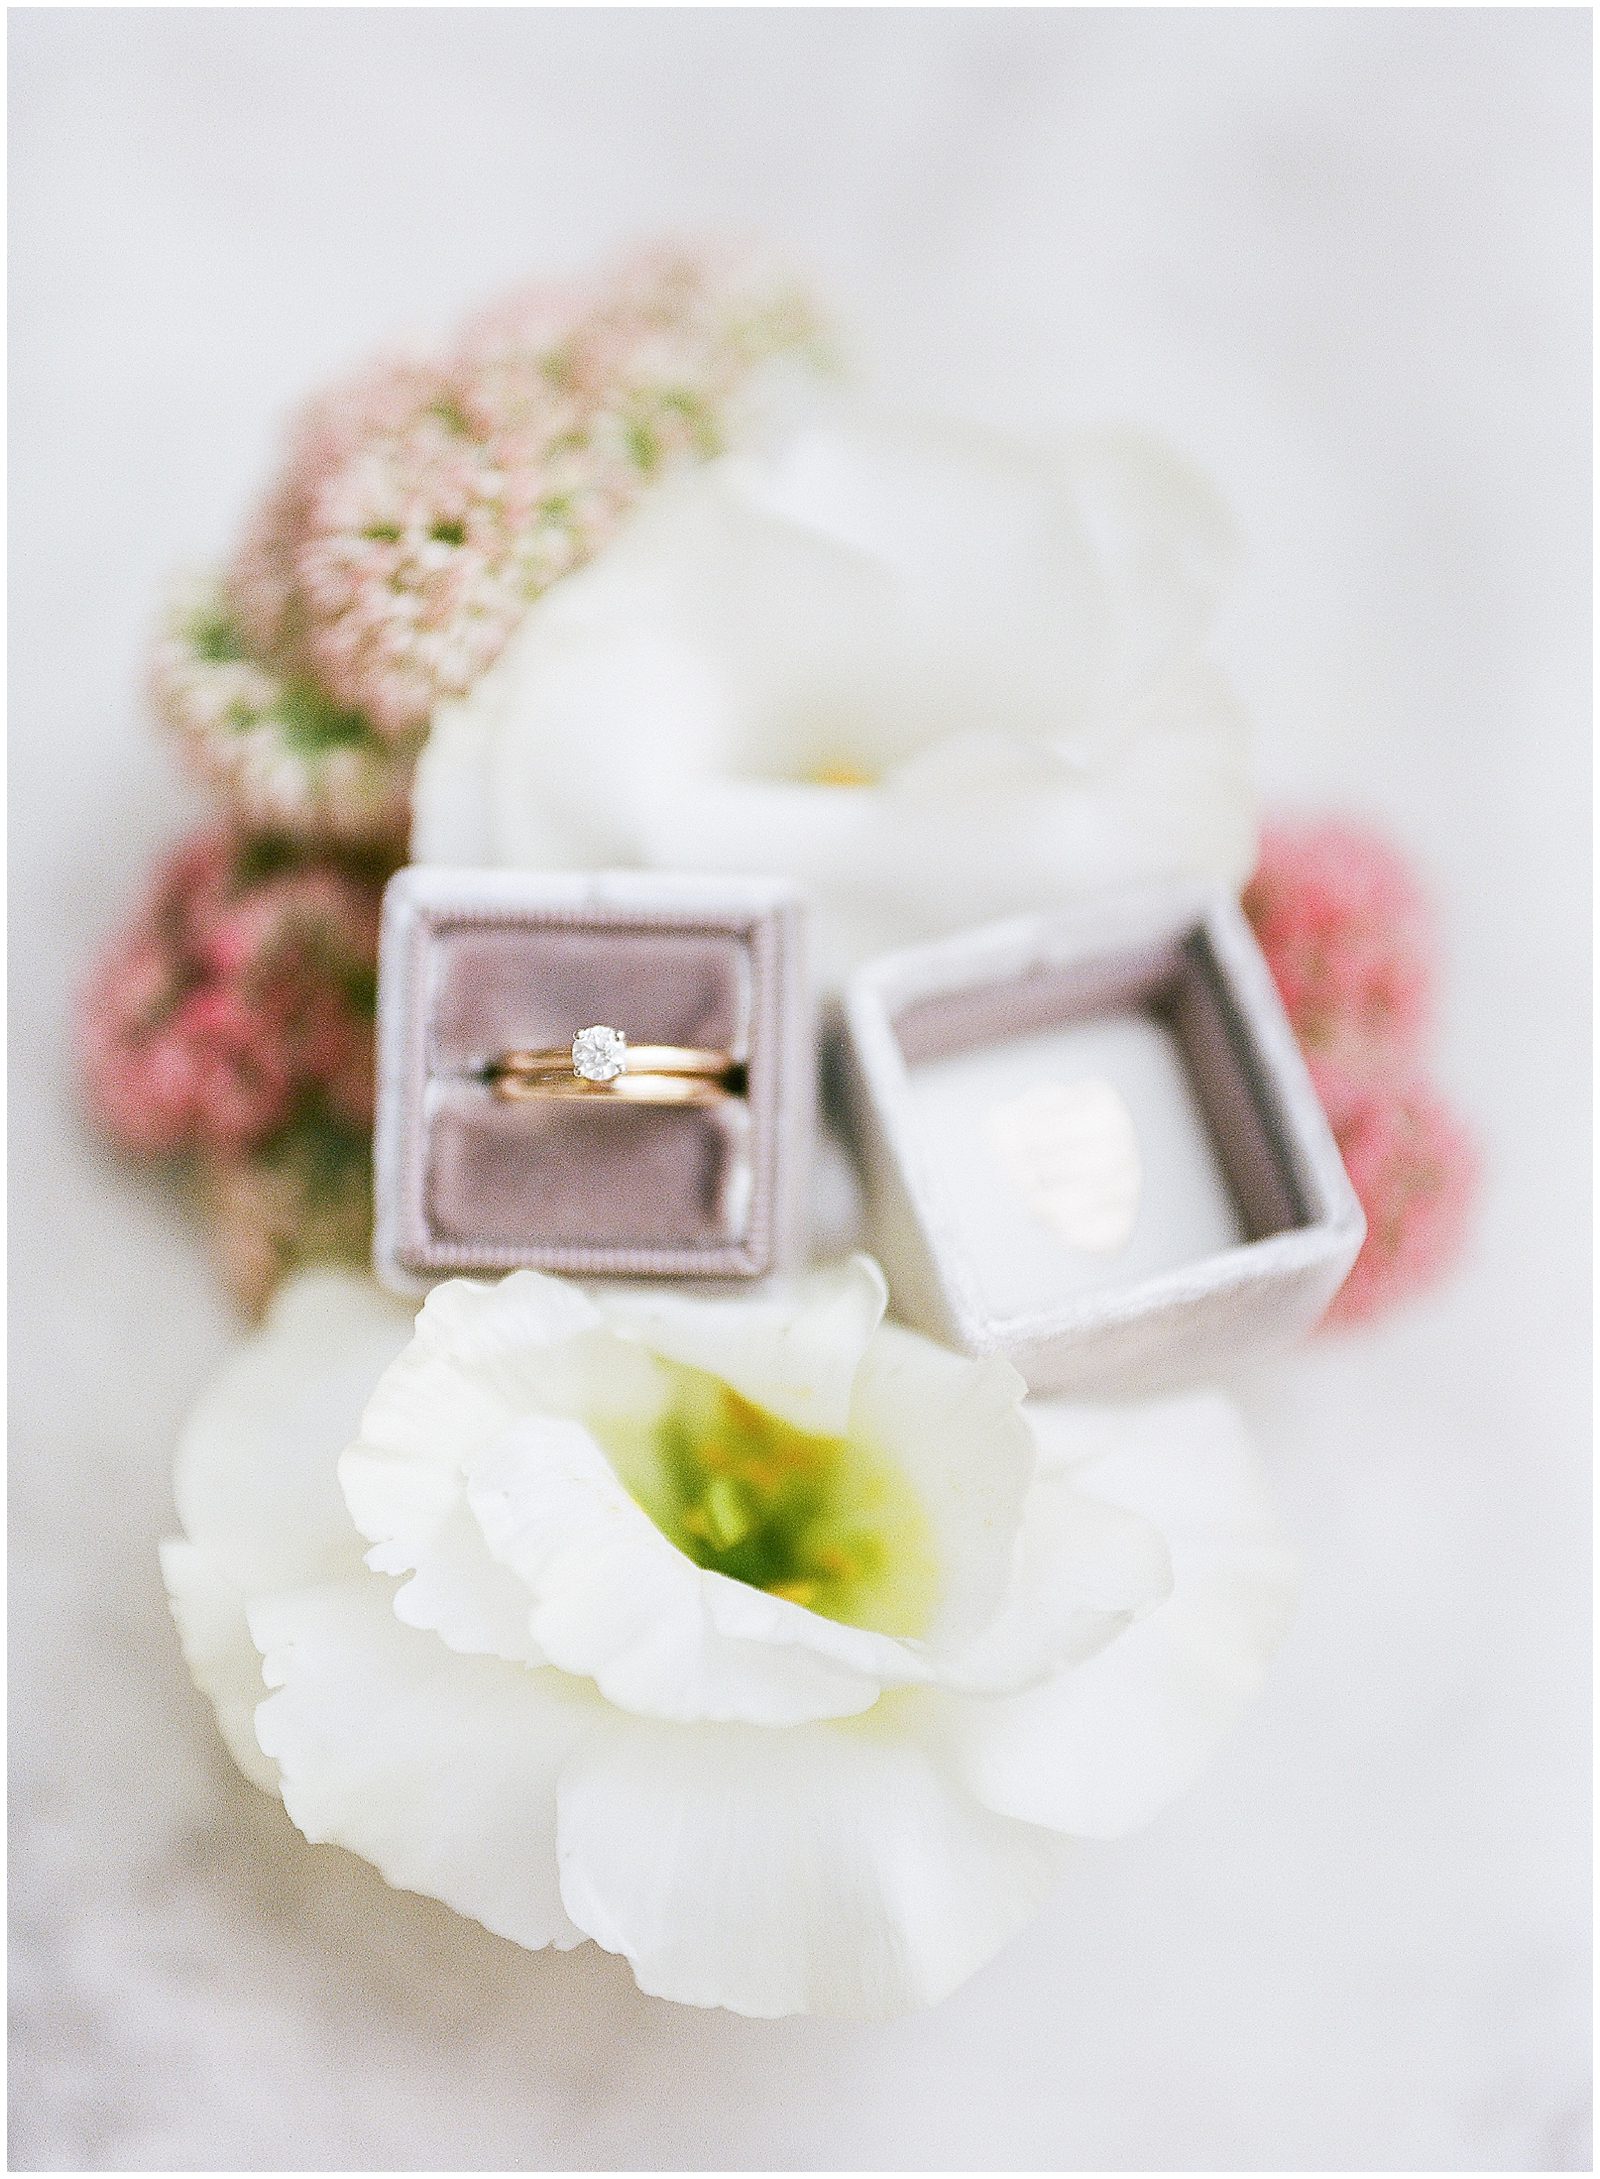 Wedding Ring Detail in Box By West Virginia Wedding Photographer